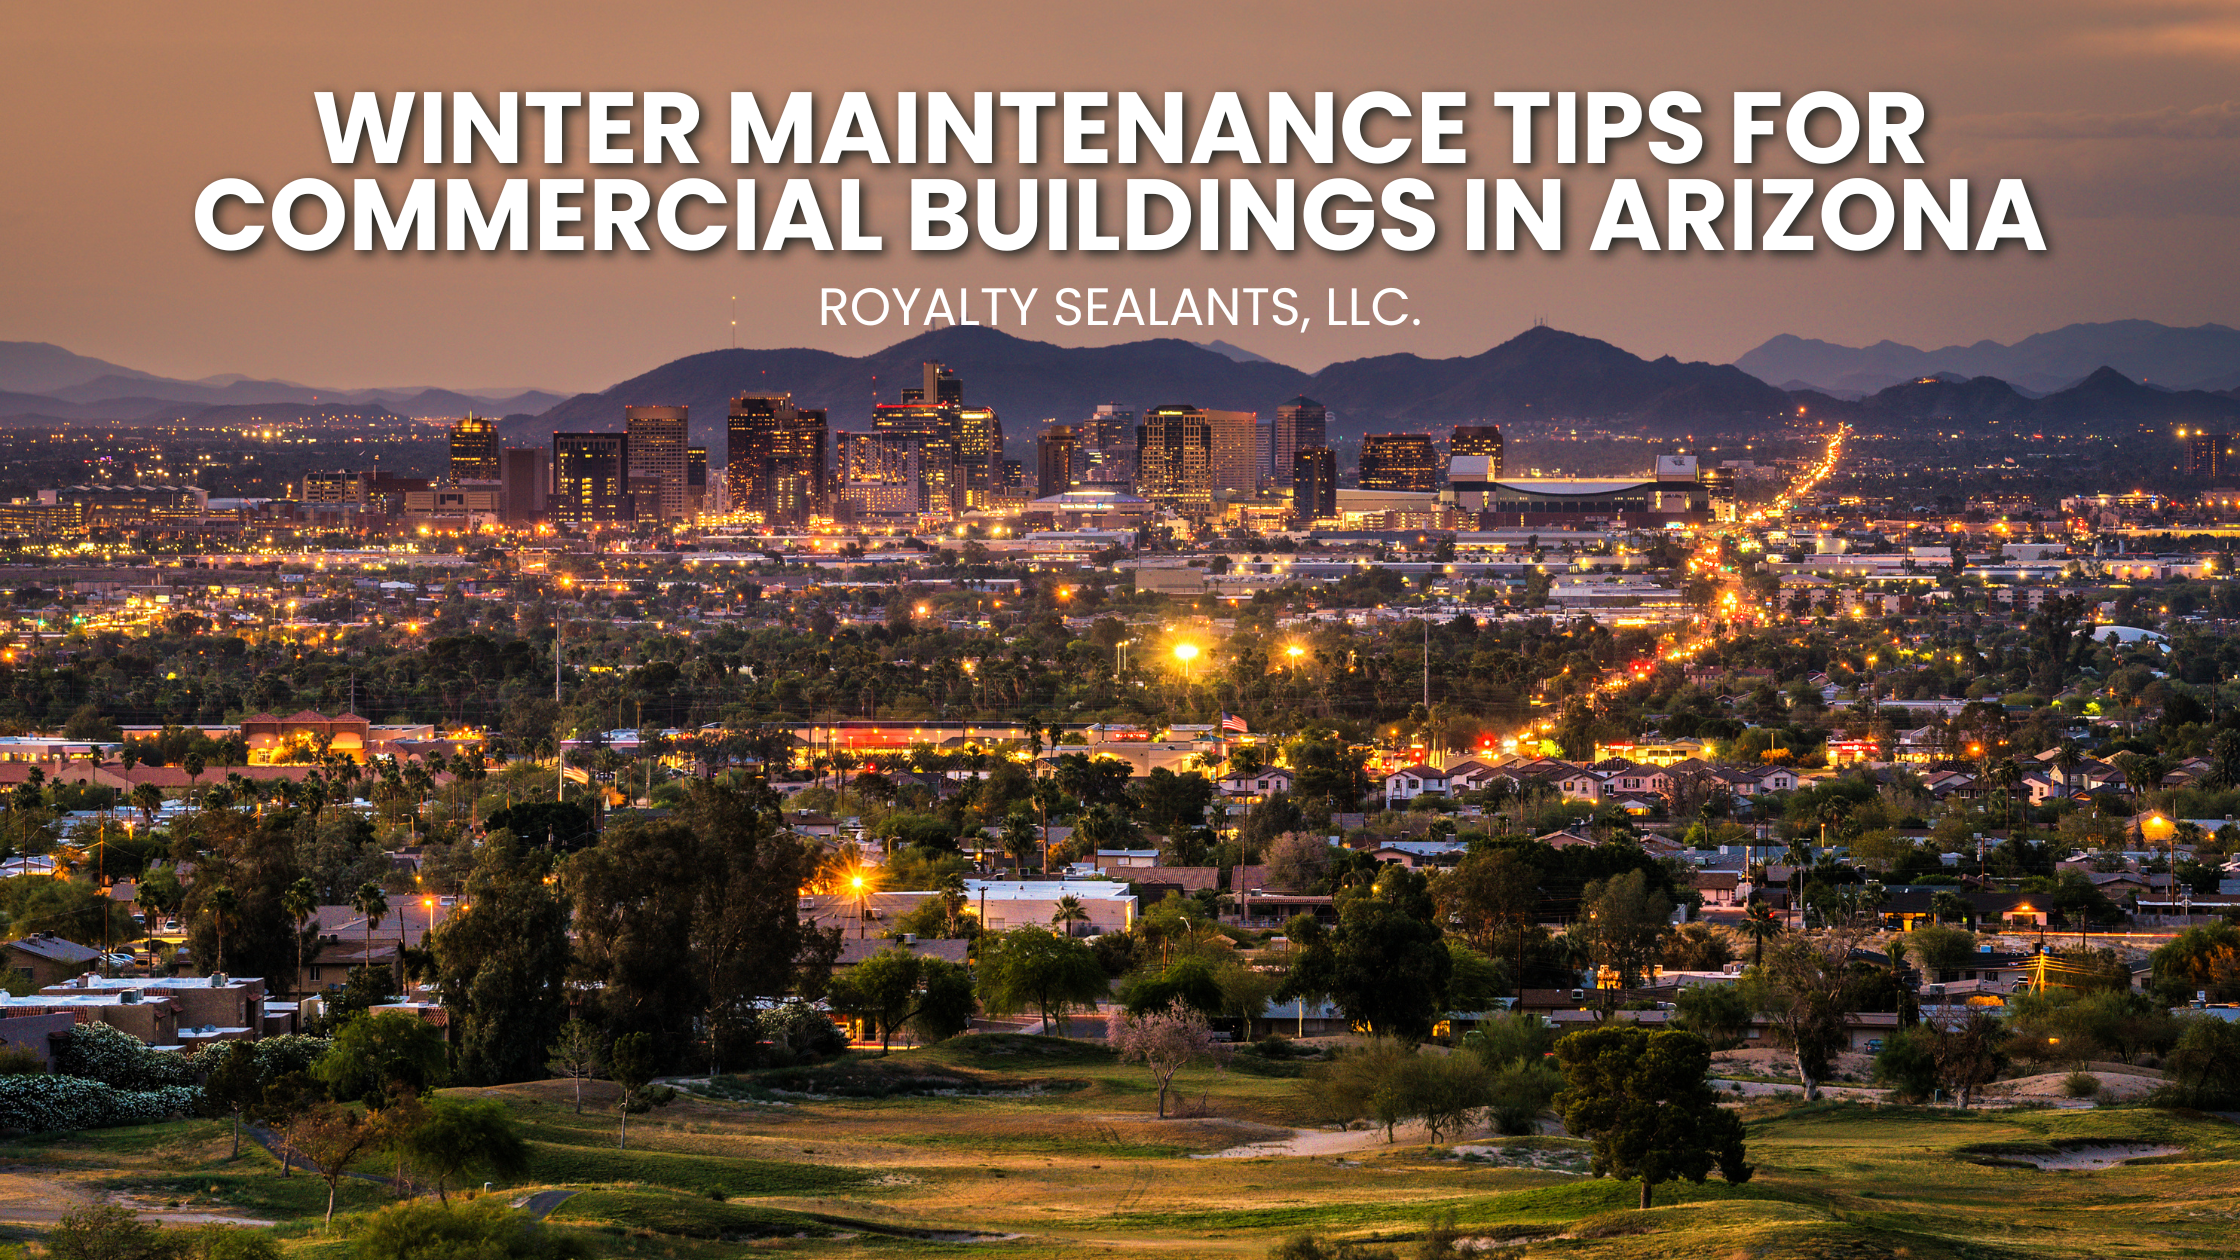 Winter Maintenance Tips for Commercial Buildings in Arizona